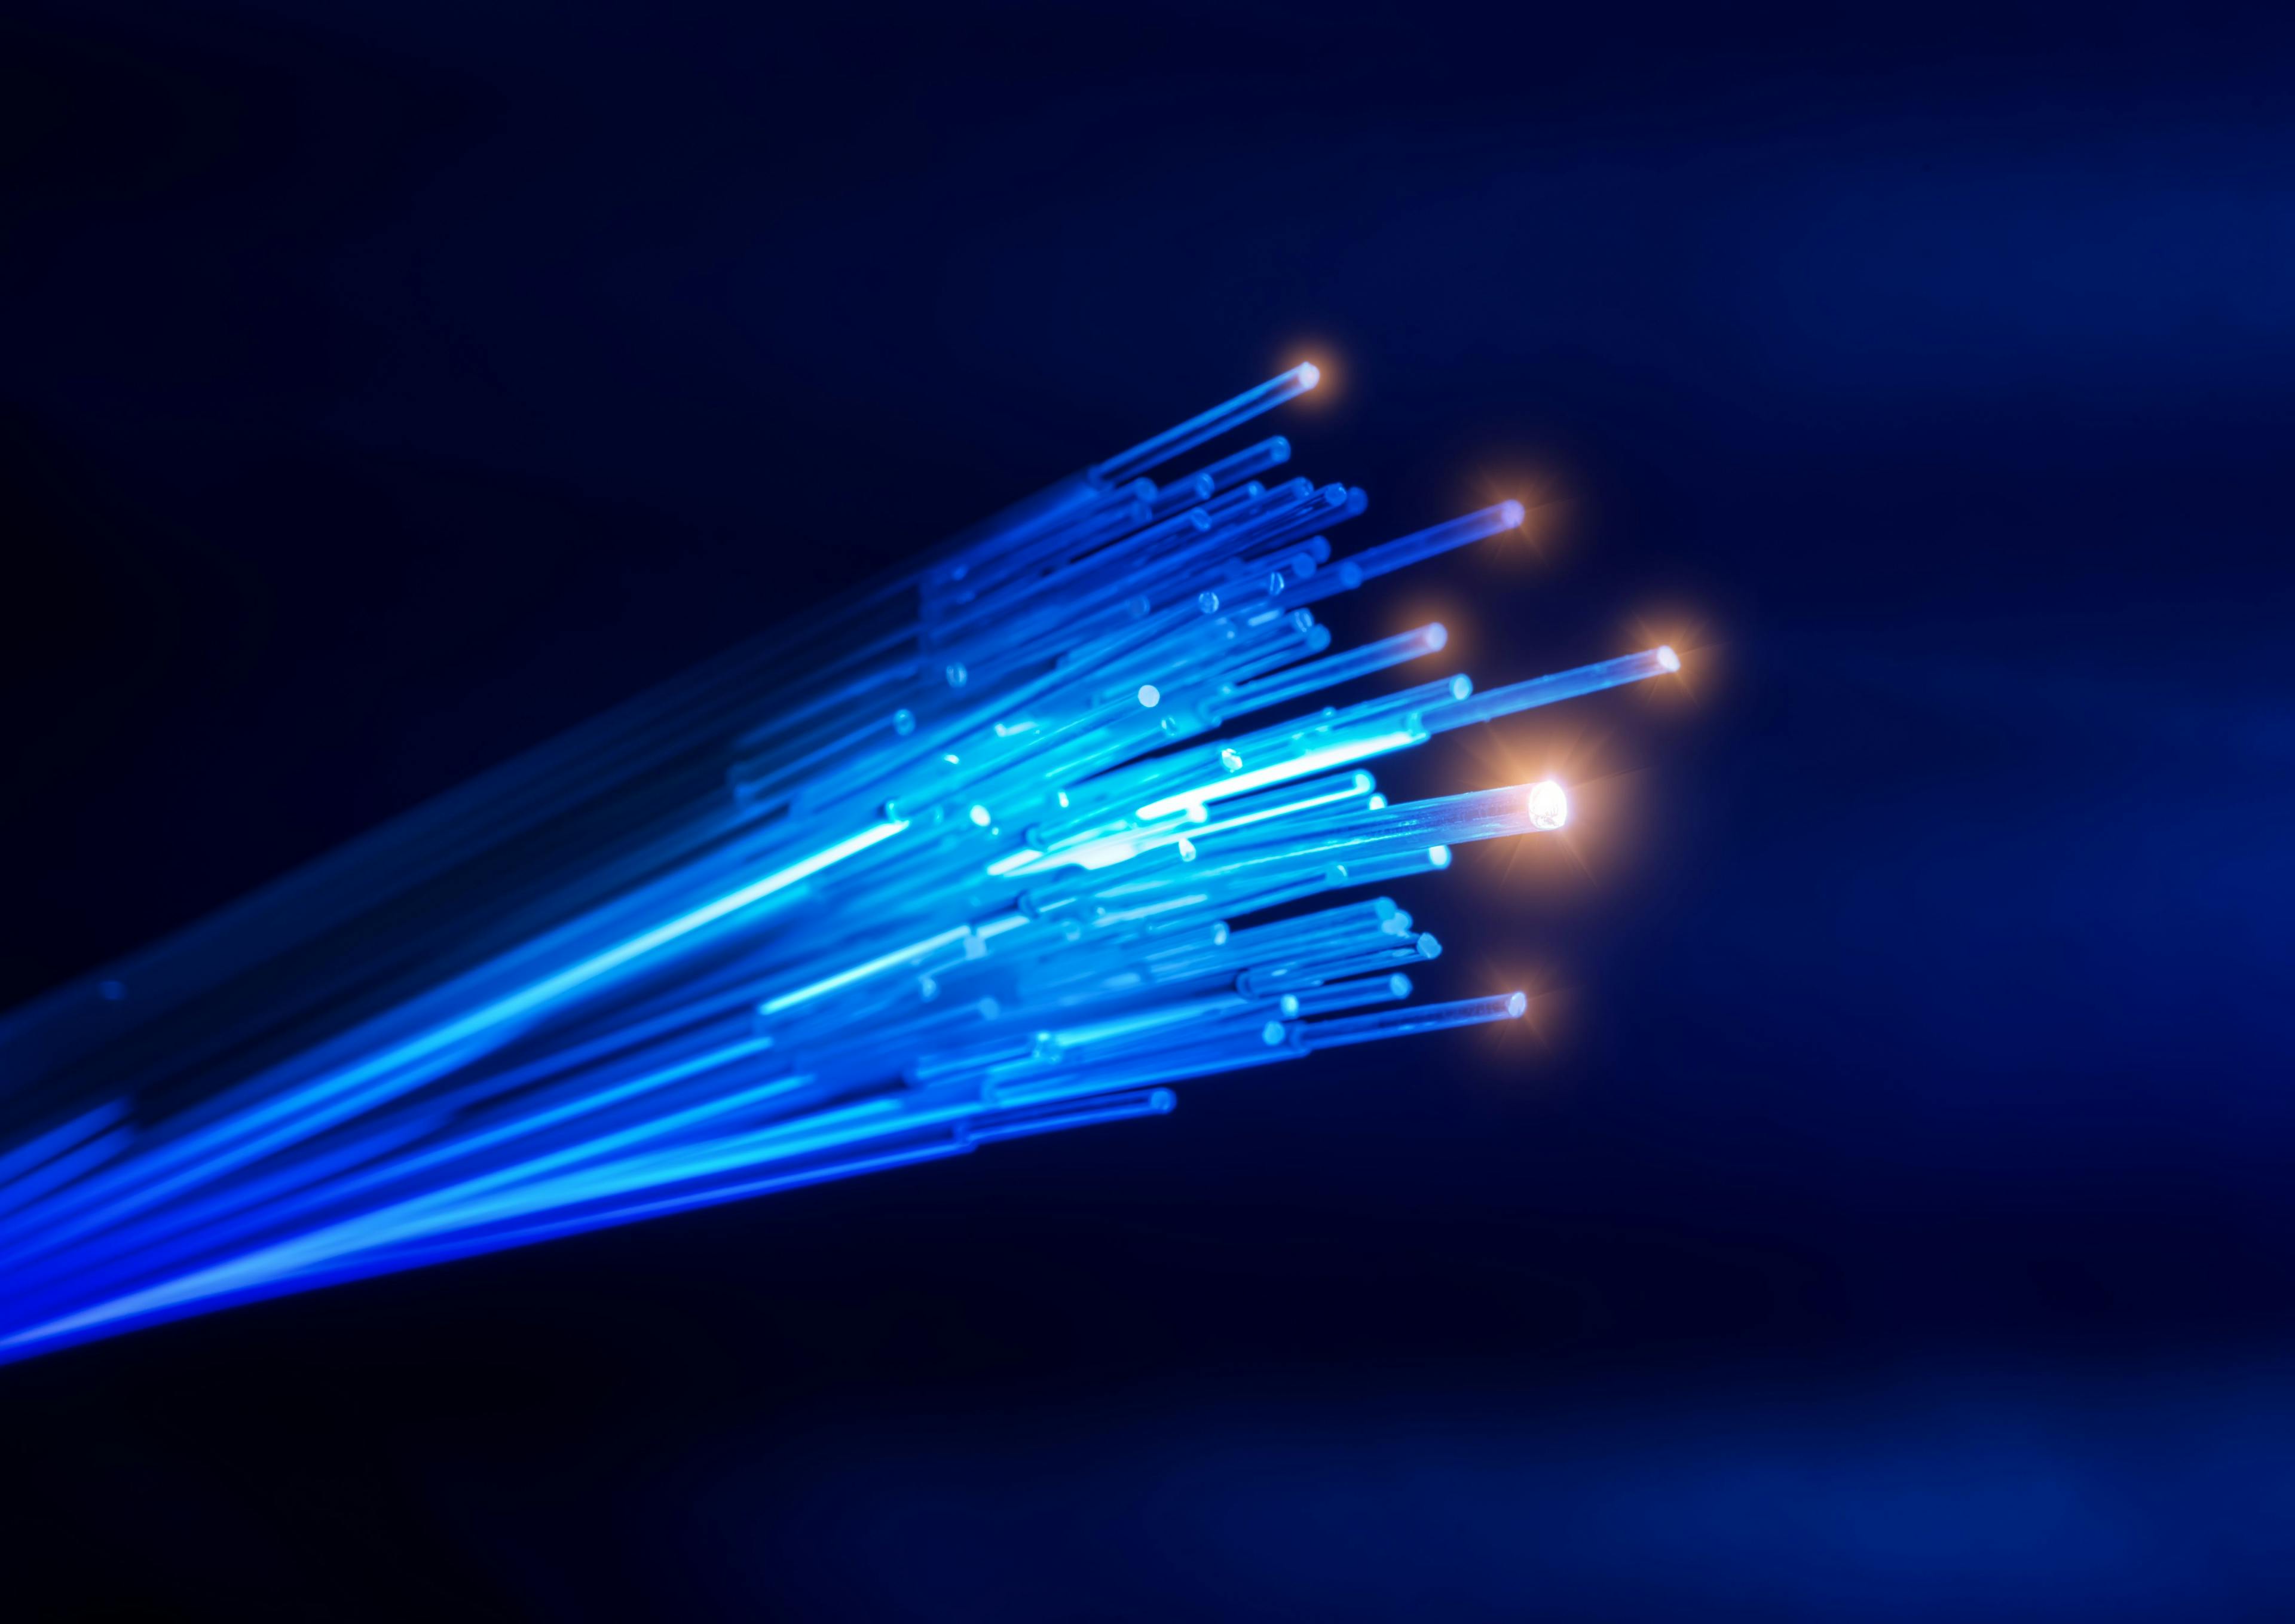 fiber optical network cable | Image Credit: © xiaoliangge - stock.adobe.com